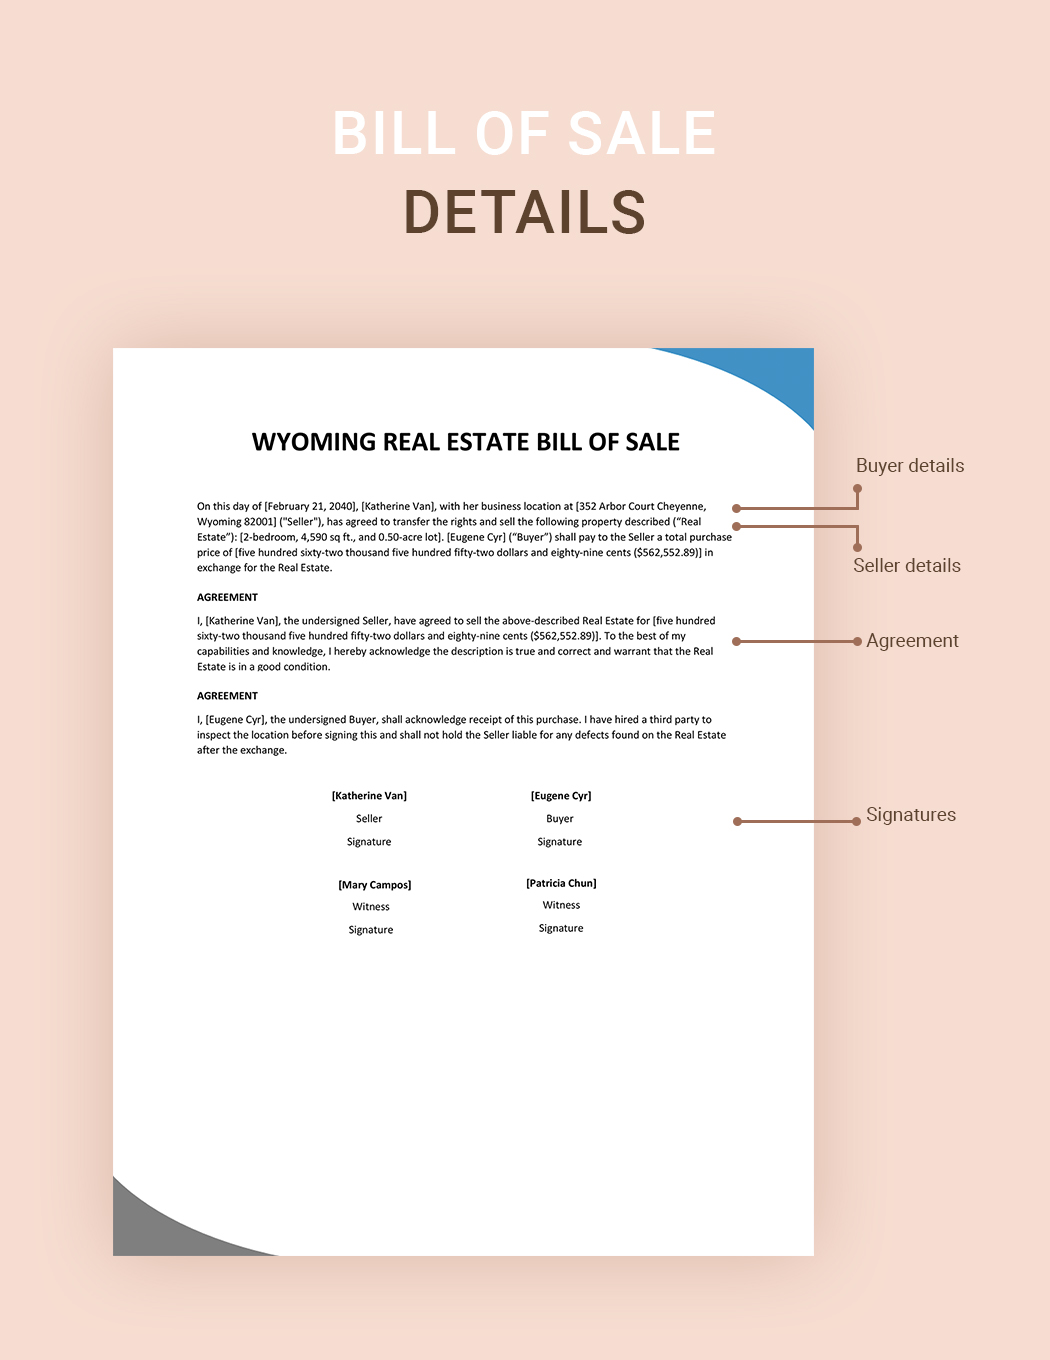 Wyoming Real Estate Bill of Sale Template